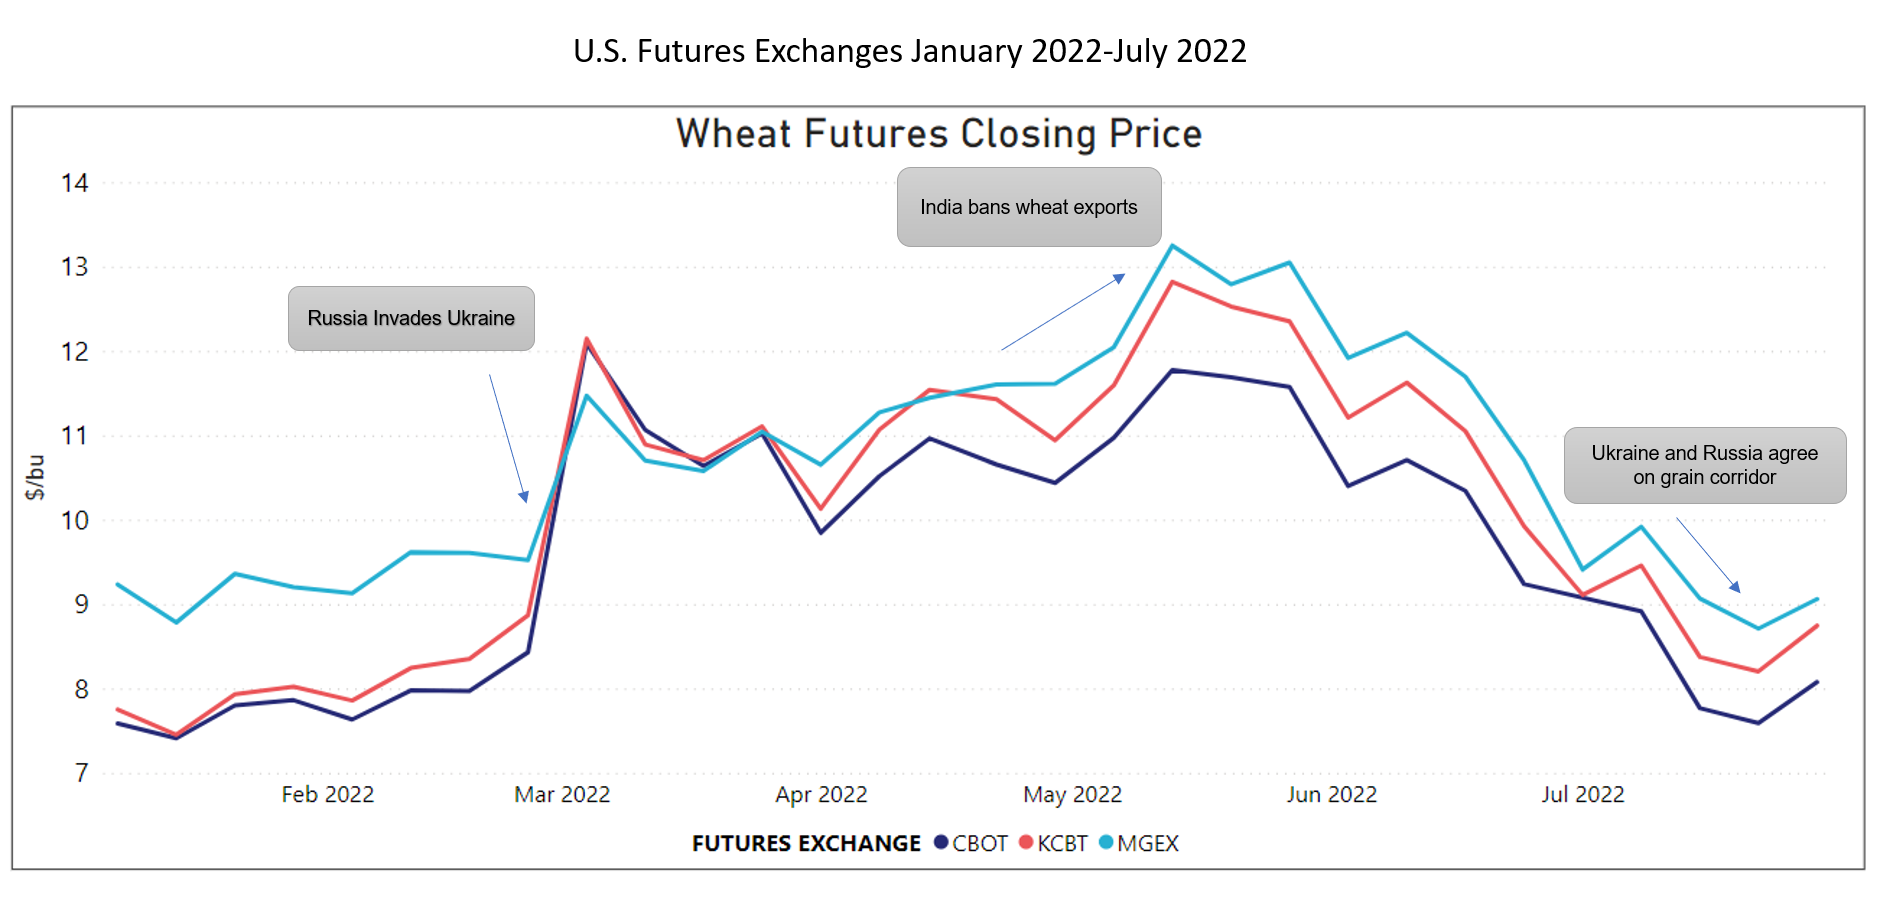 Line chart of wheat futures prices since February 2022